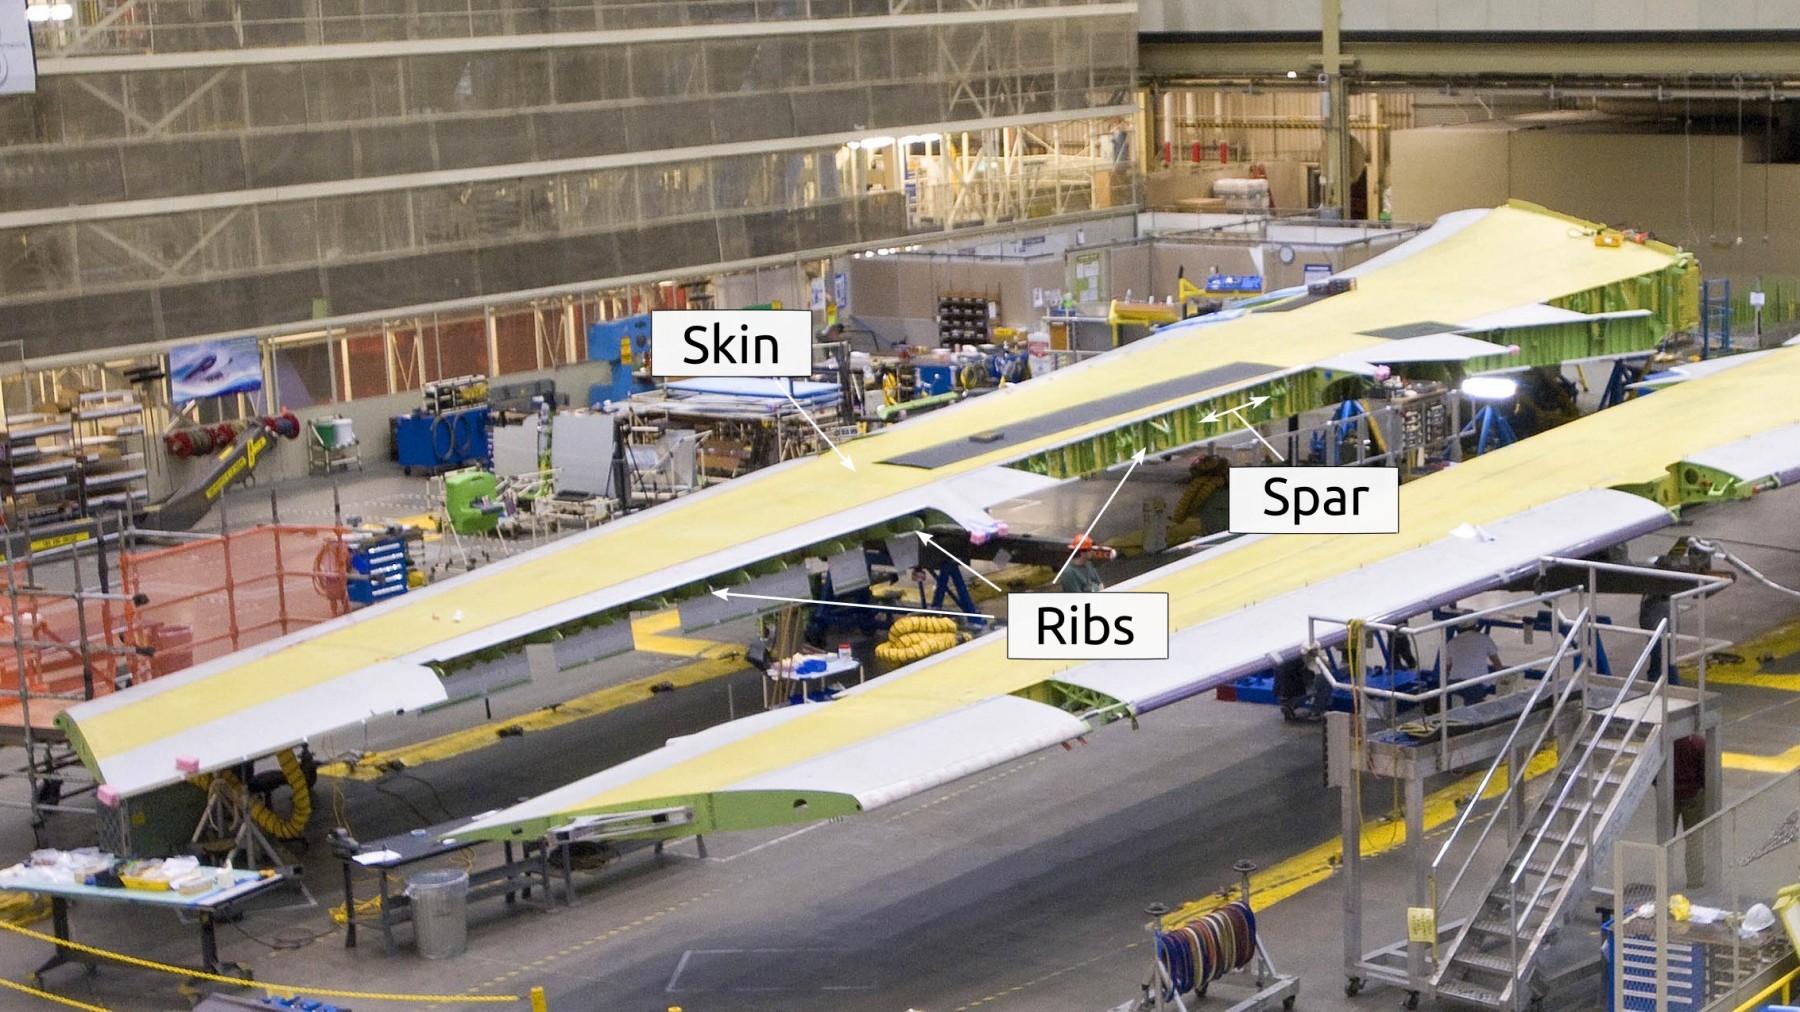 B747-8 wings waiting to be assembled to the rest of the fuselage